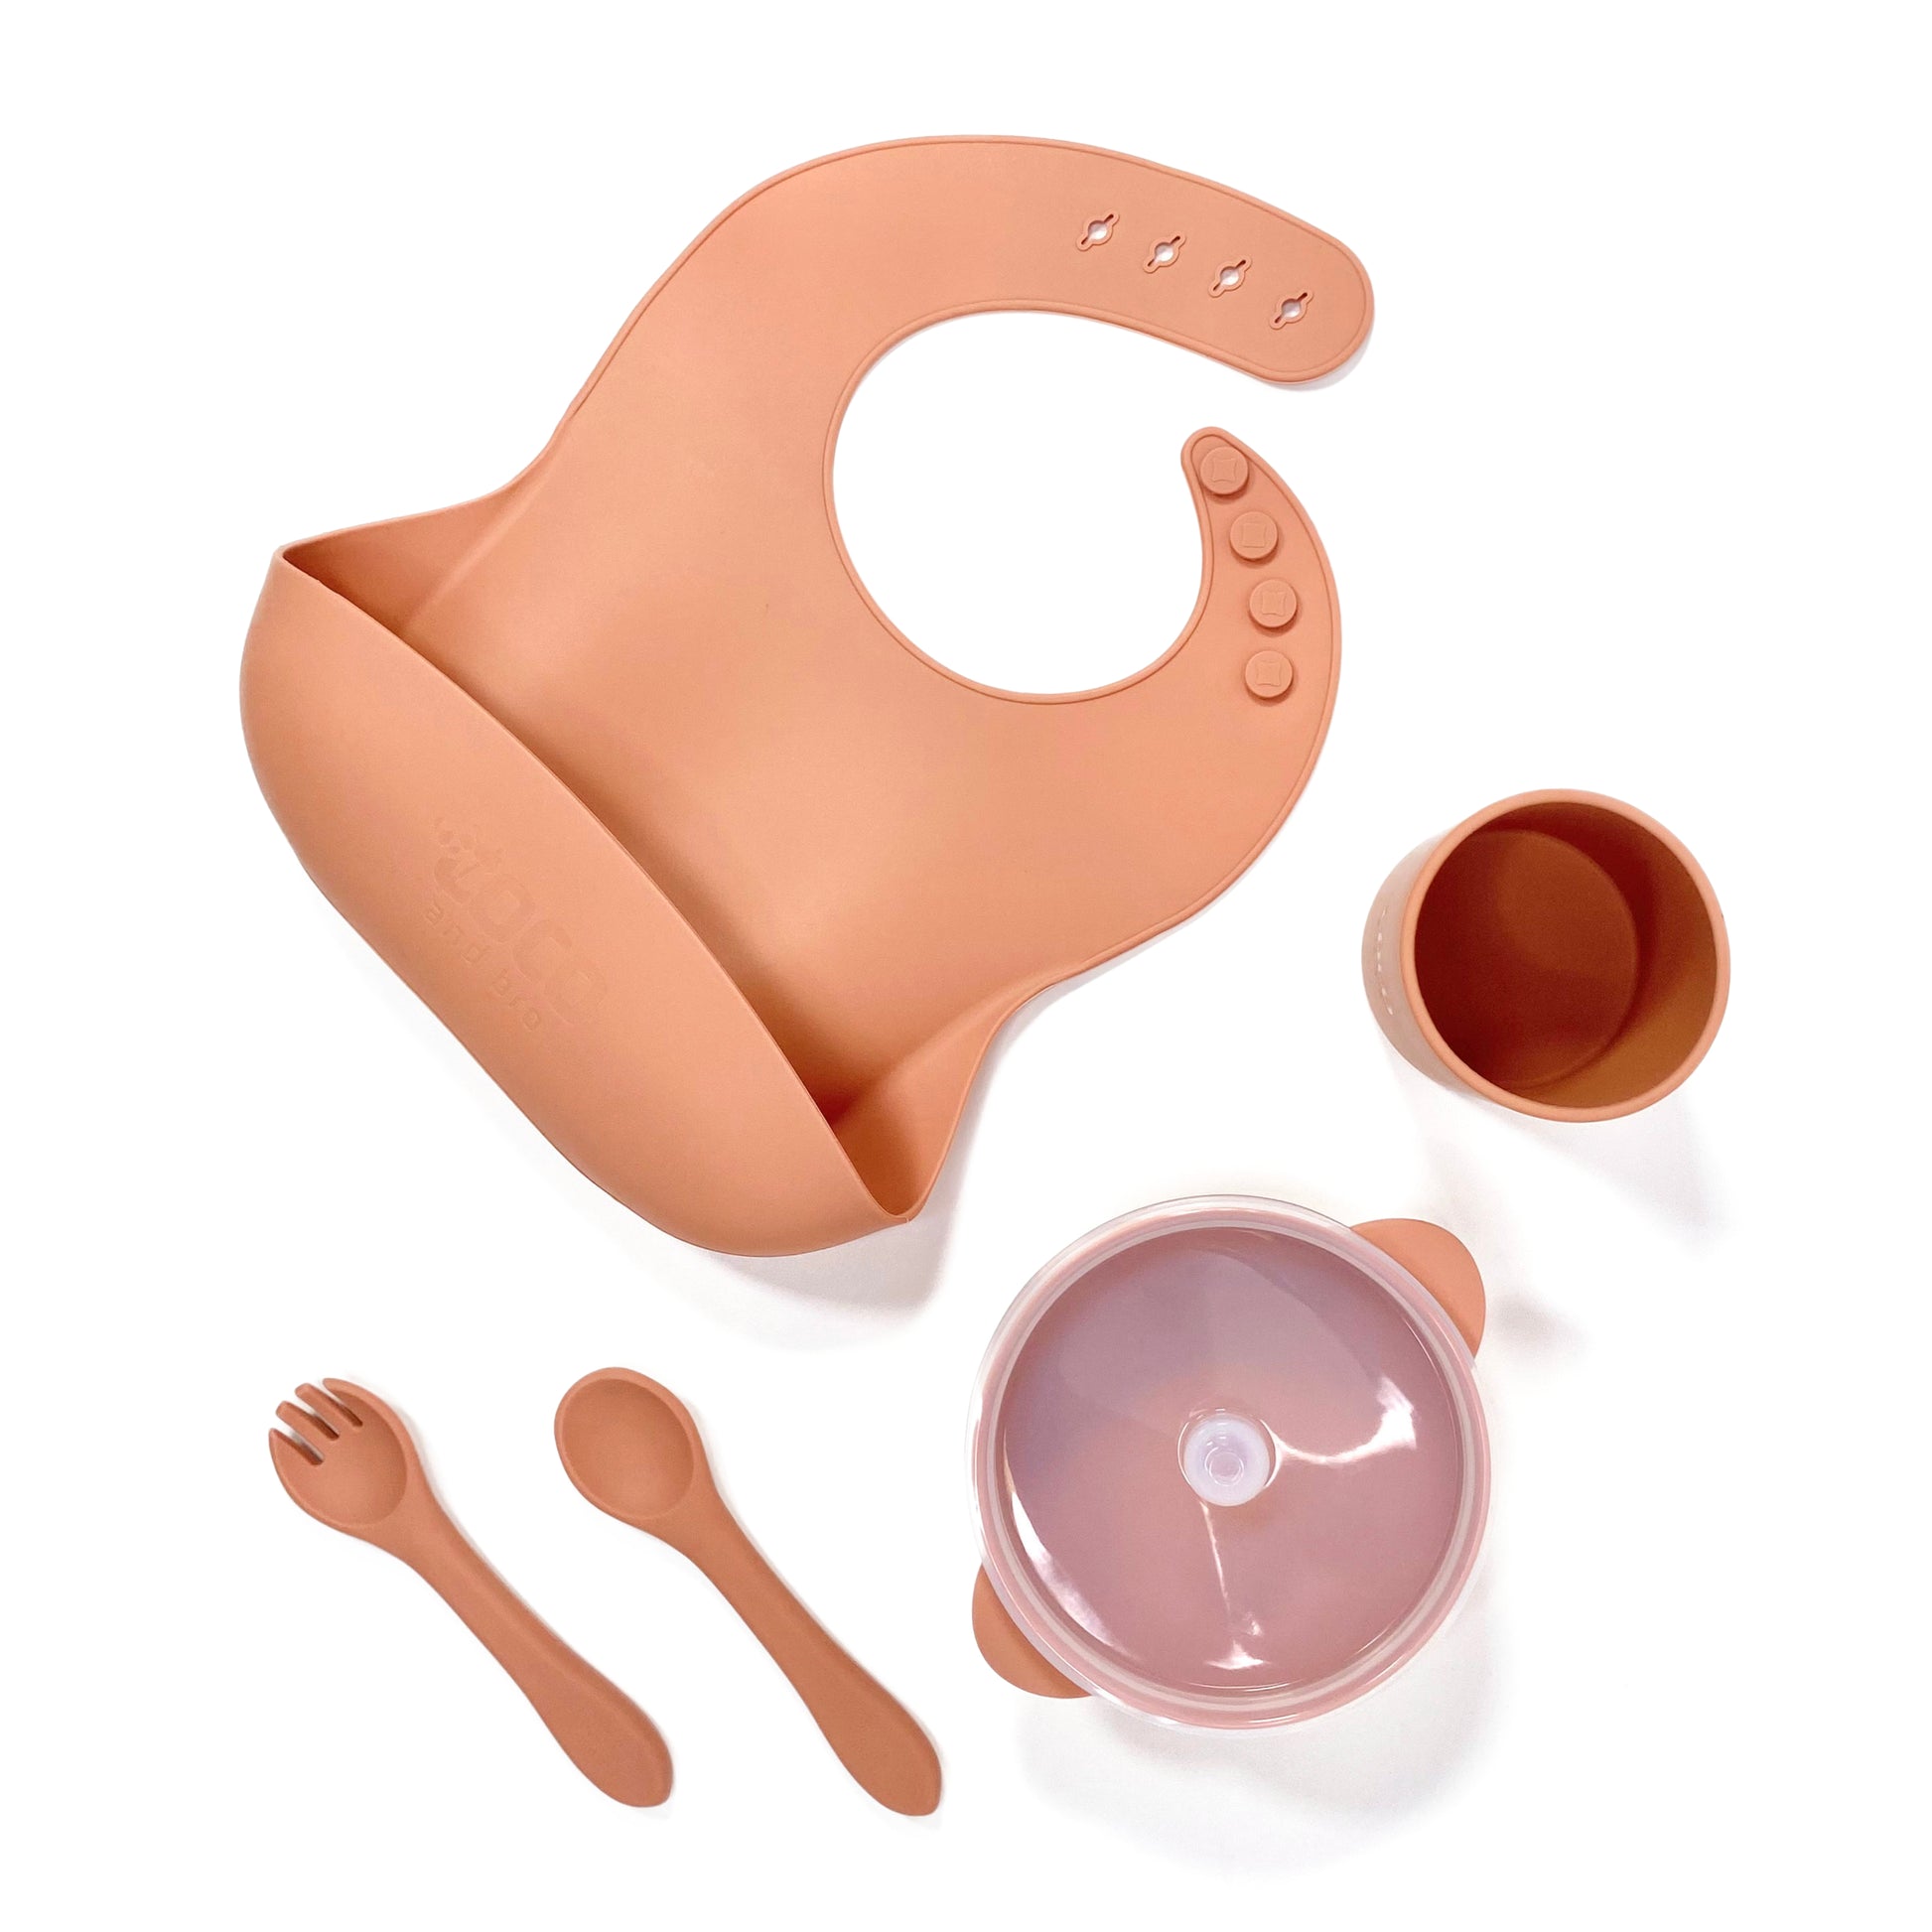 A sunset orange silicone children’s feeding set, including adjustable silicone bib with crumb catcher, silicone drinking cup, silicone bowl with lid and silicone cutlery.